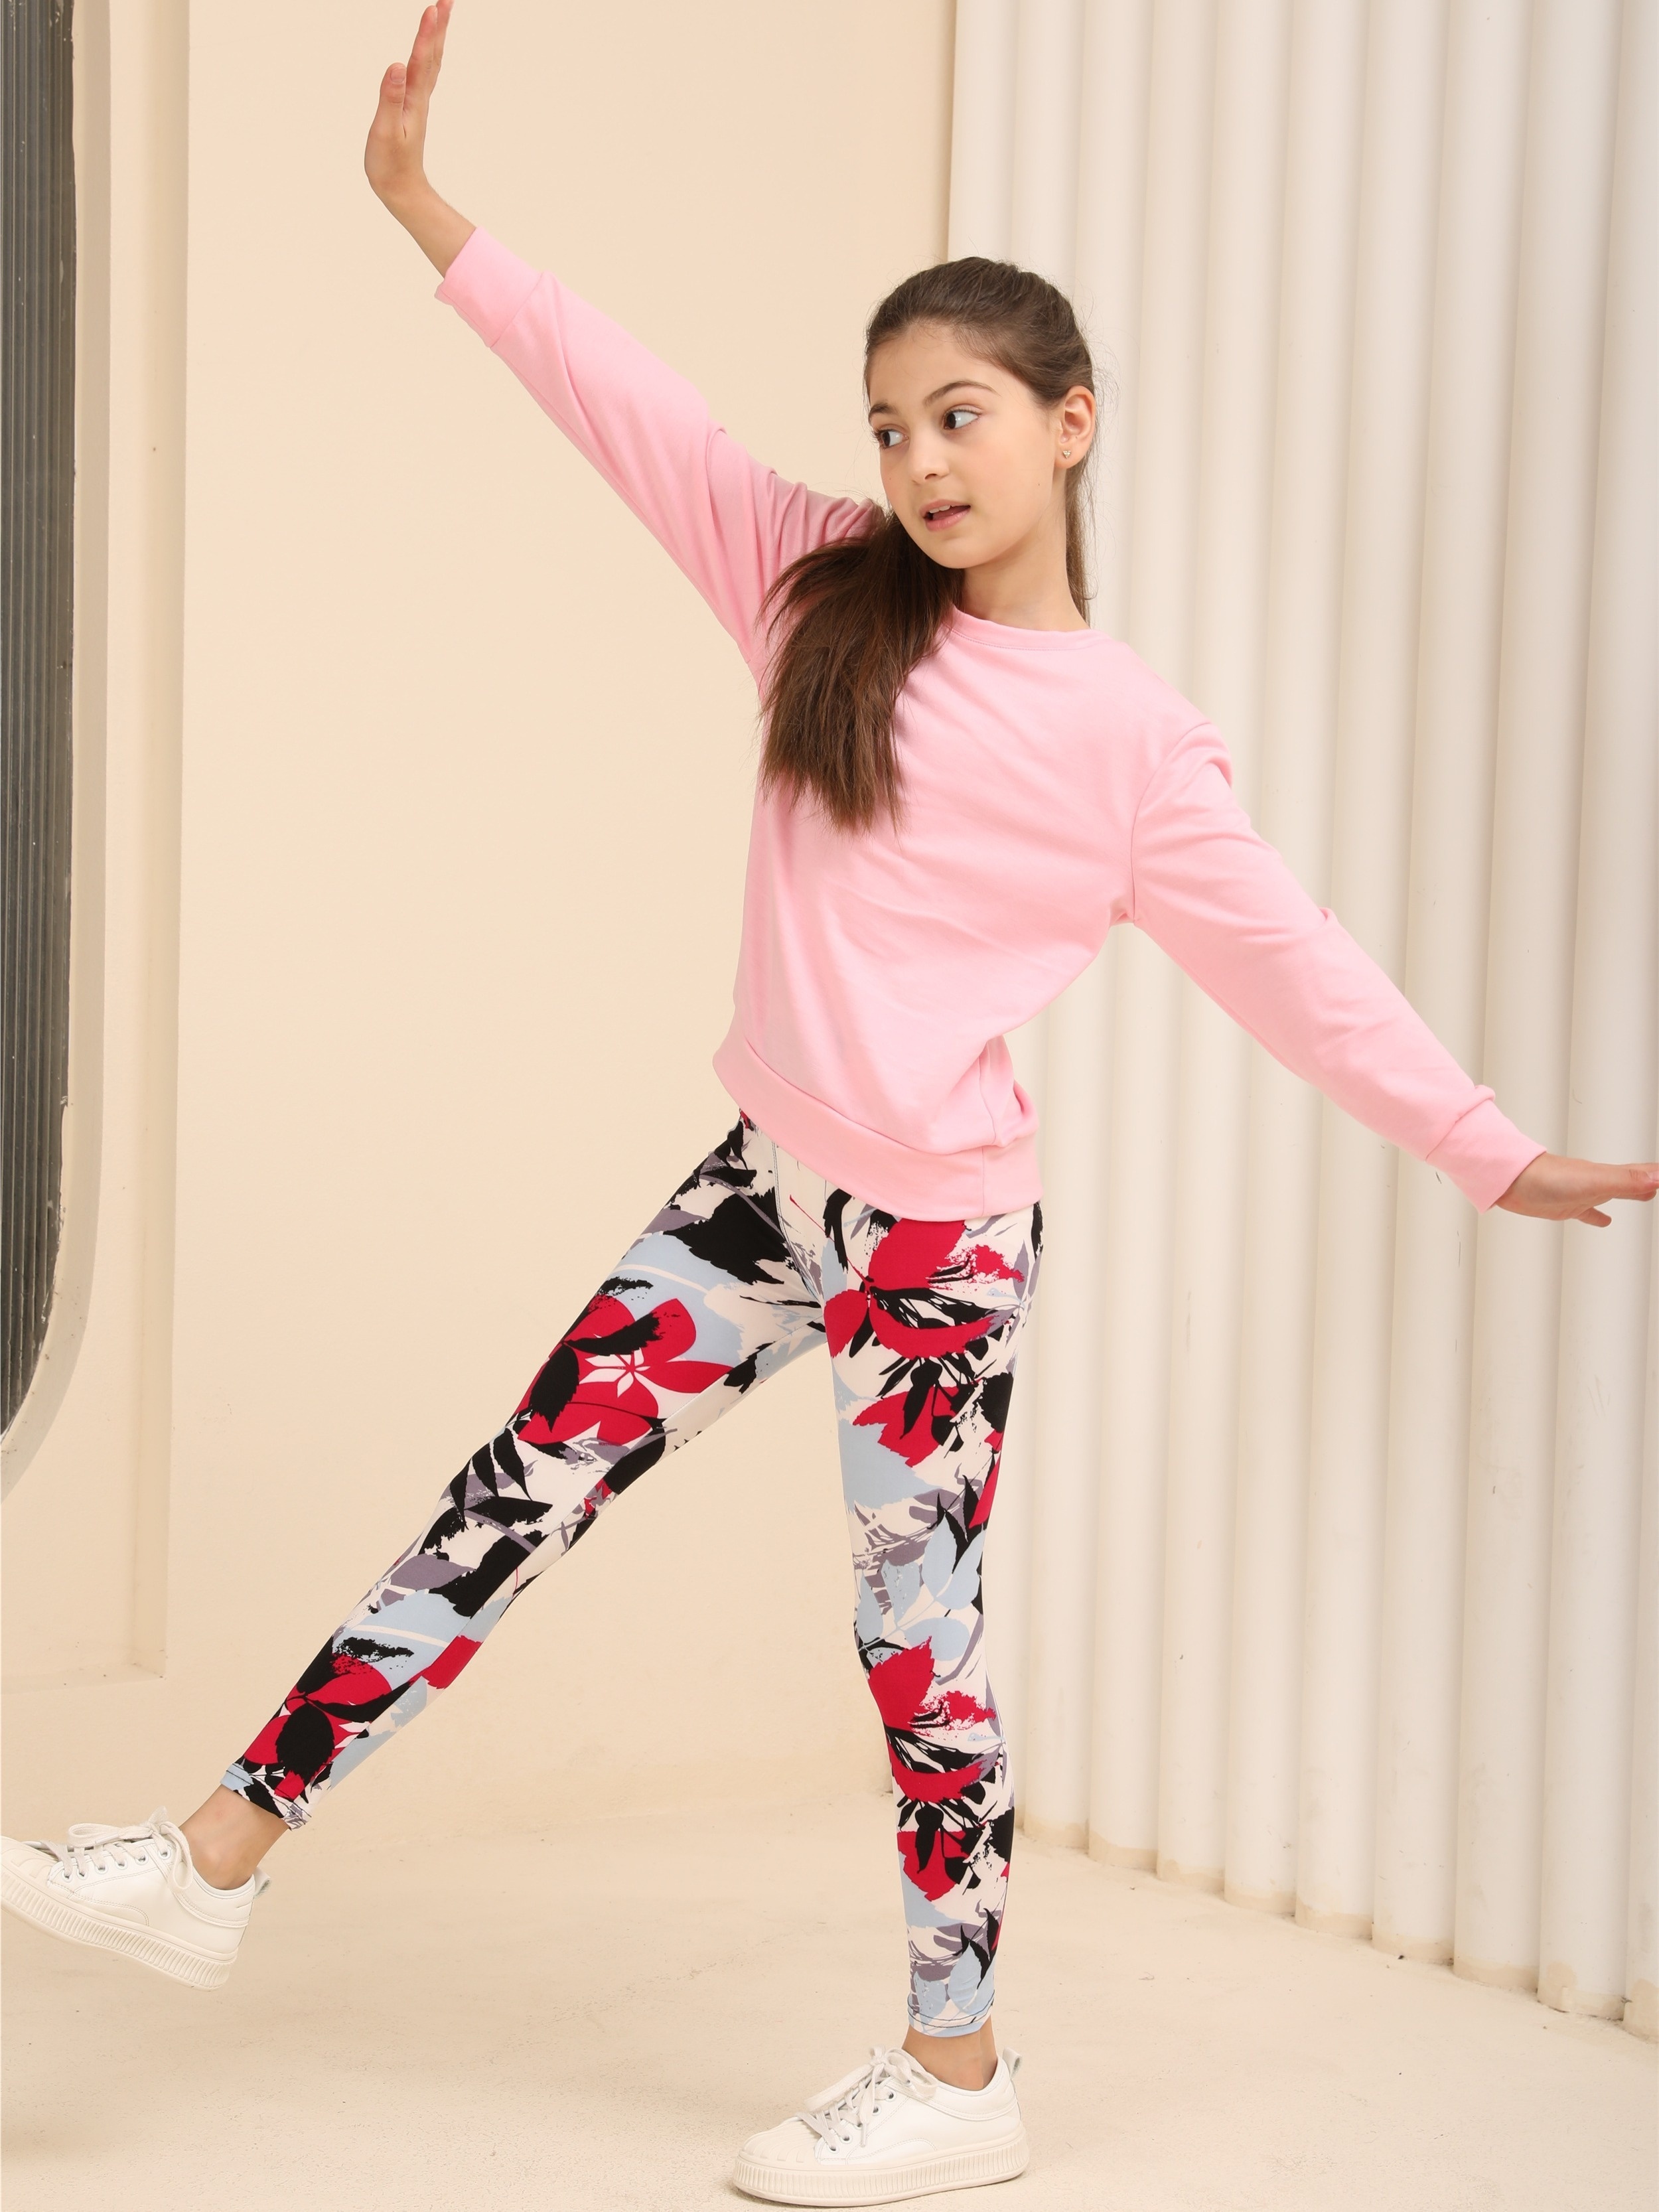 Girls Athletic Leggings Kids Dance Running Yoga Pants Workout Active Dance  Tights, Size 4-10T